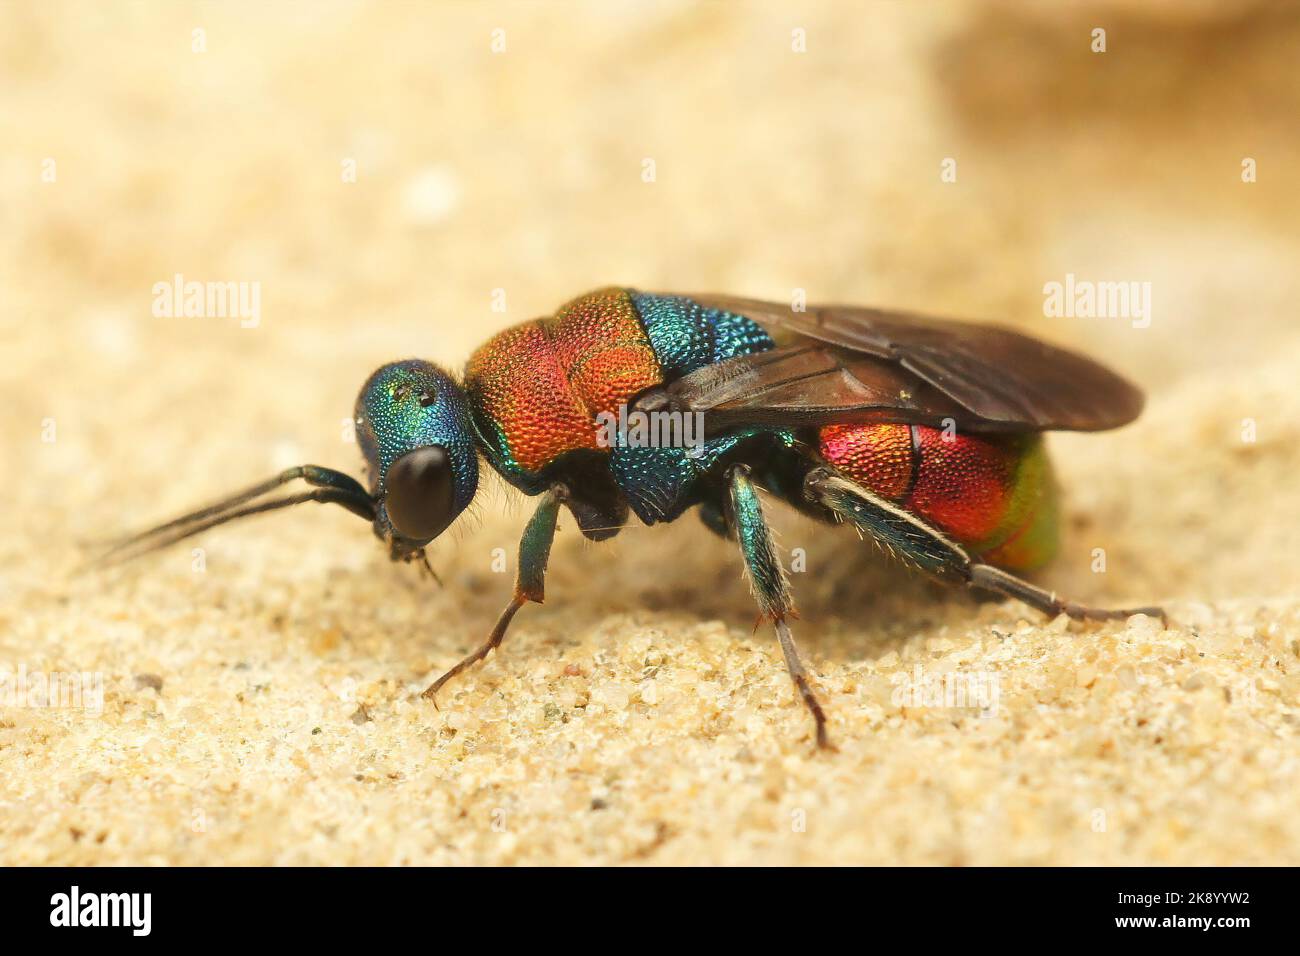 A macro shot of a colorful Jewel wasp (Hedychrum nobile) walking on a sand Stock Photo